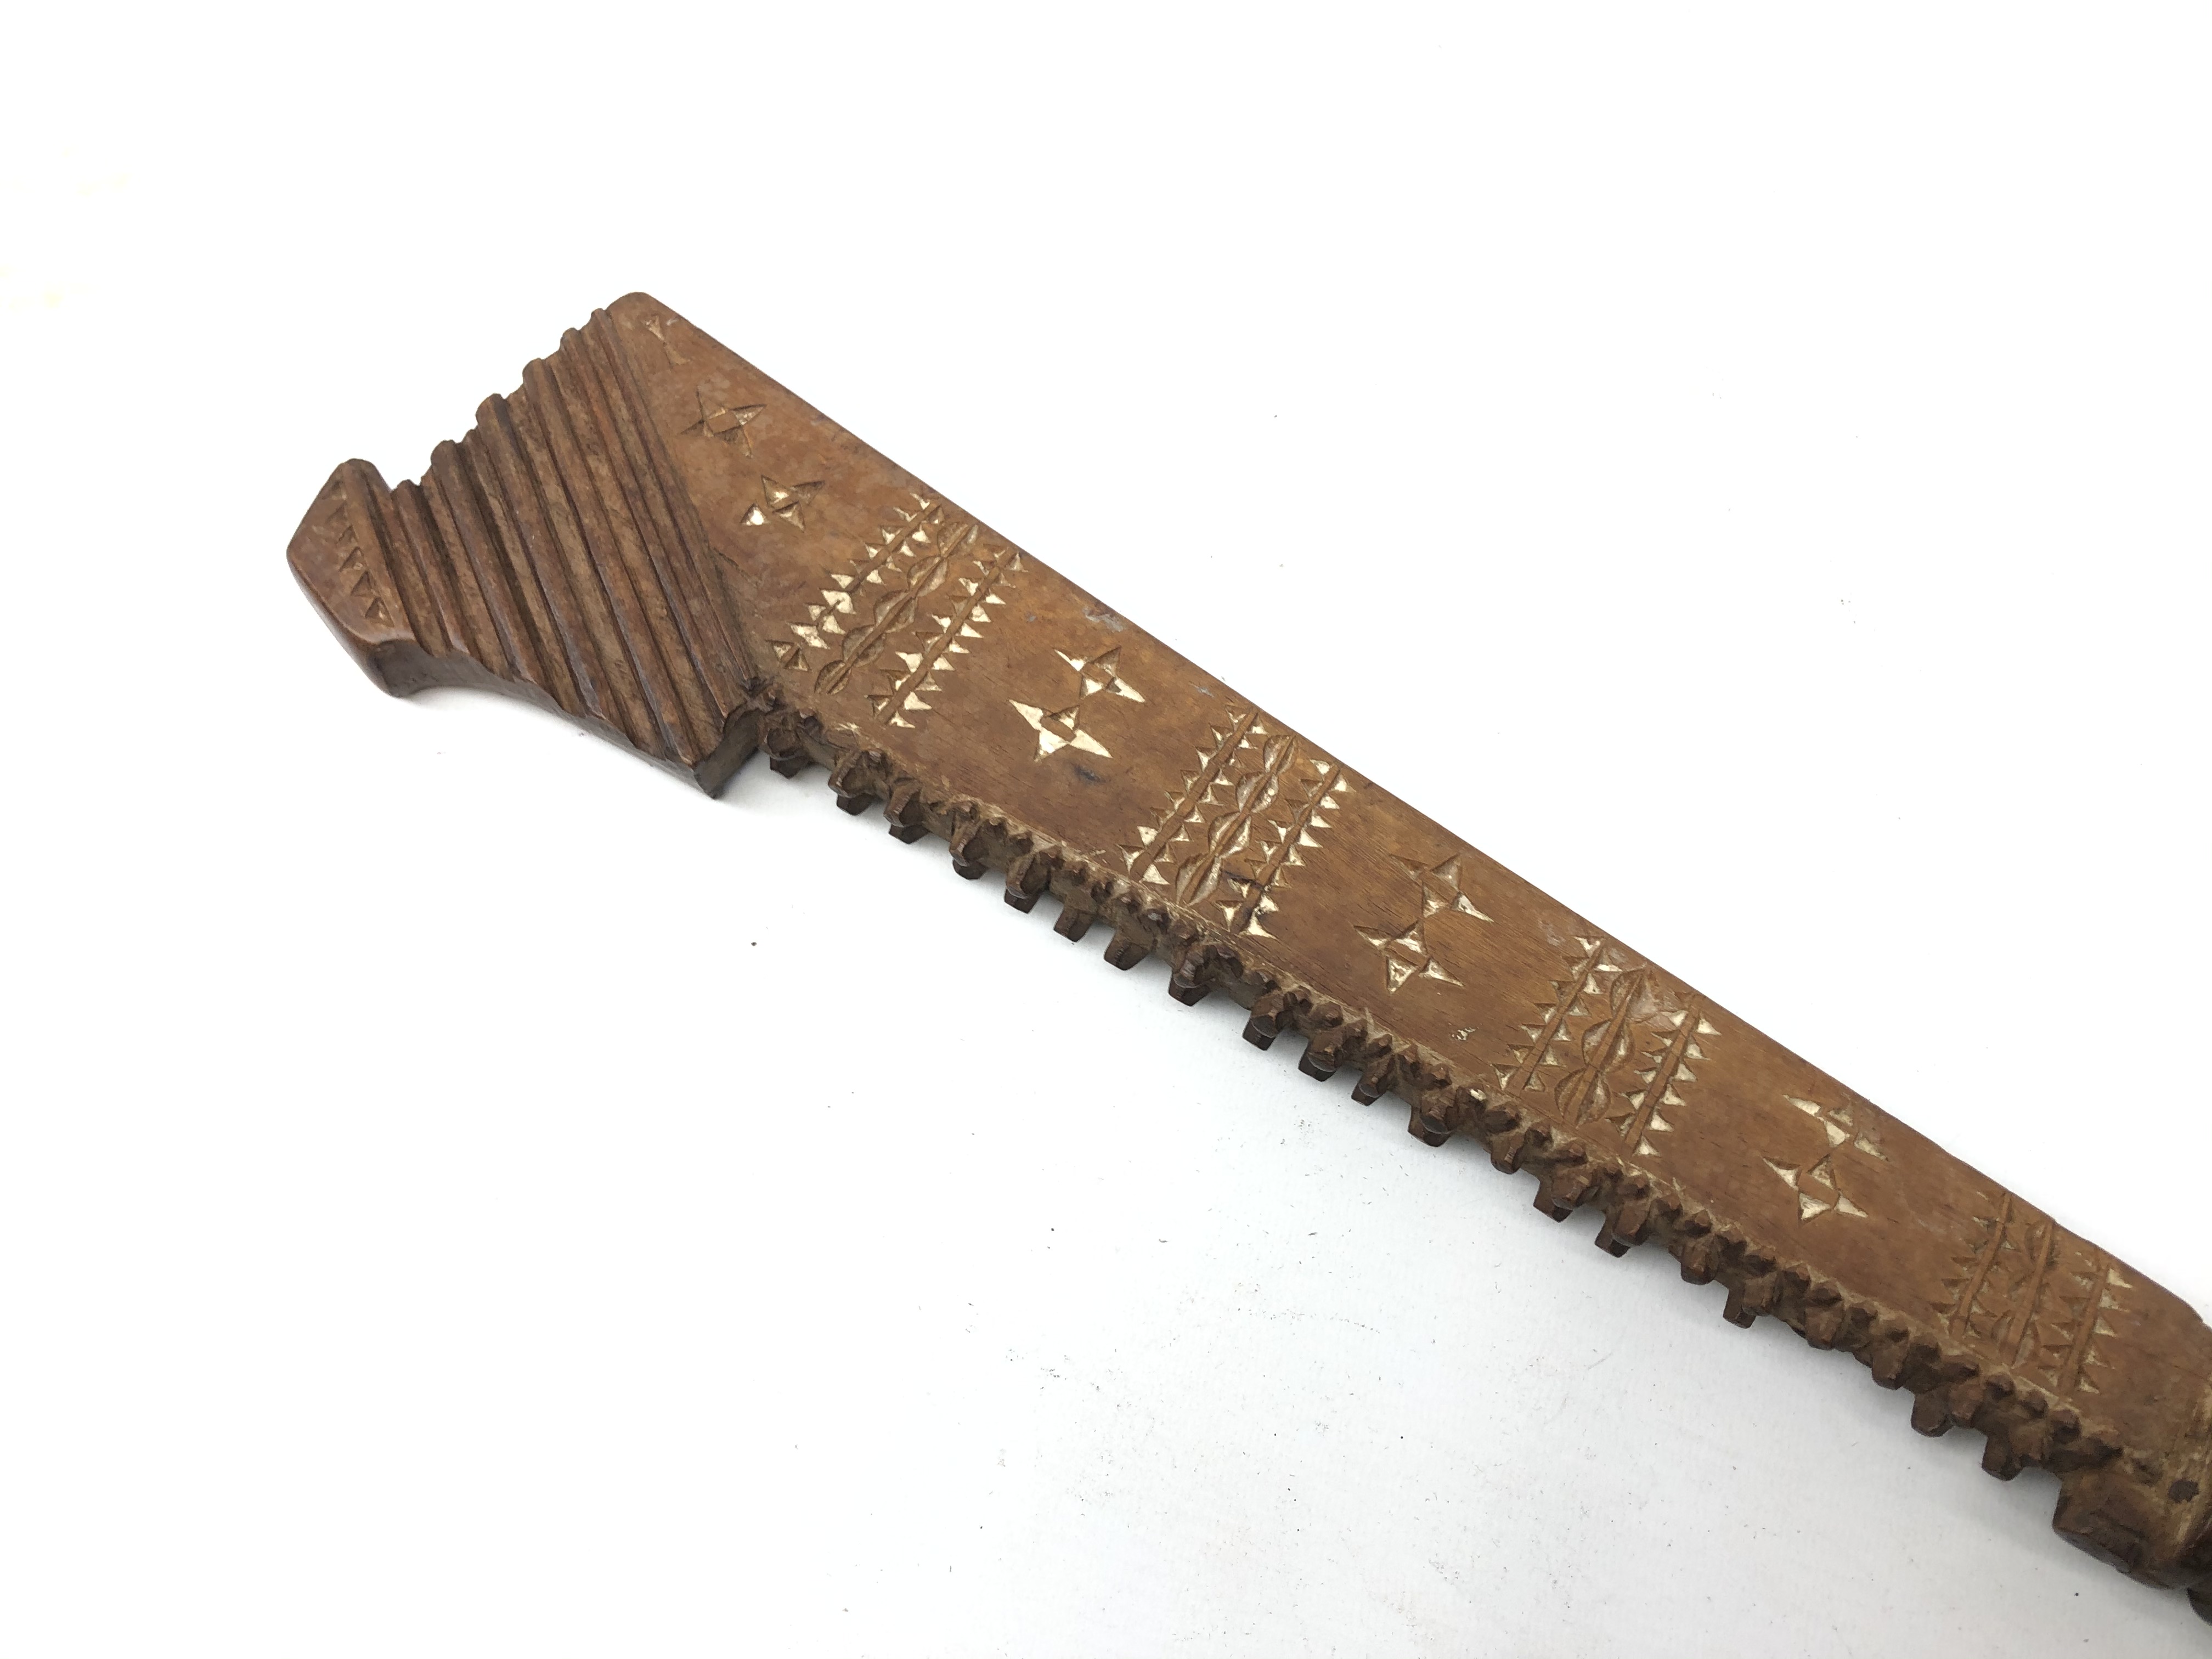 Samoan wooden club, shaped blade with serrated edge and painted geometric decoration, - Image 3 of 4